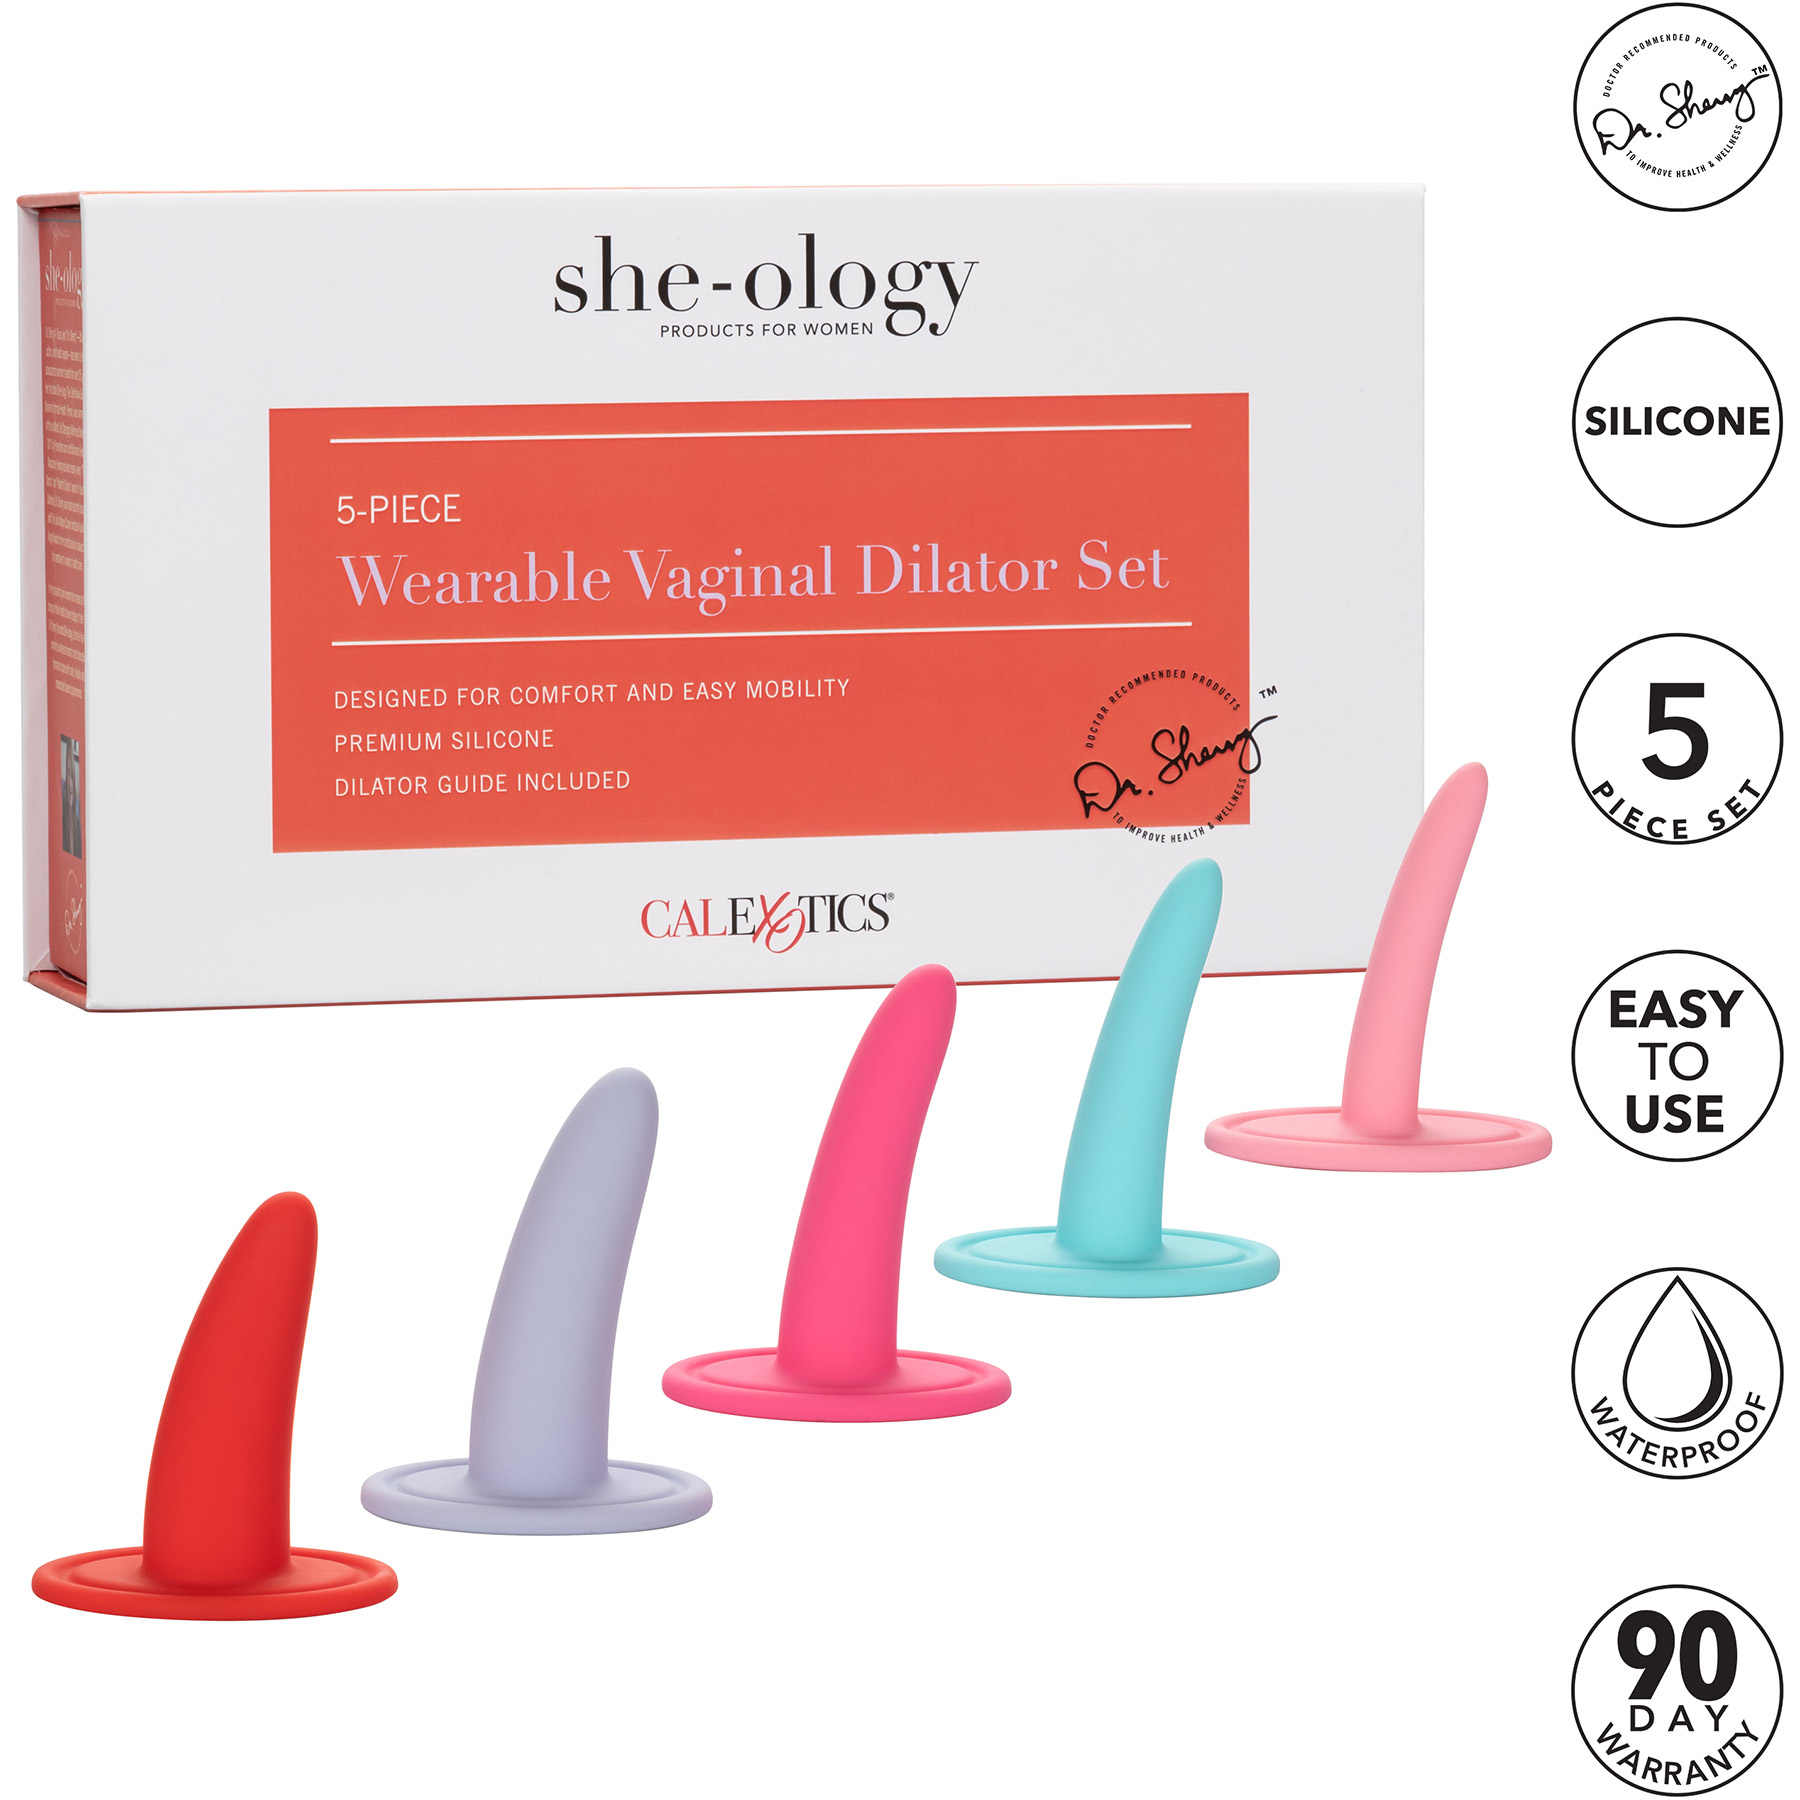 She-ology™ 5-Piece Wearable Vaginal Dilator Set - Features